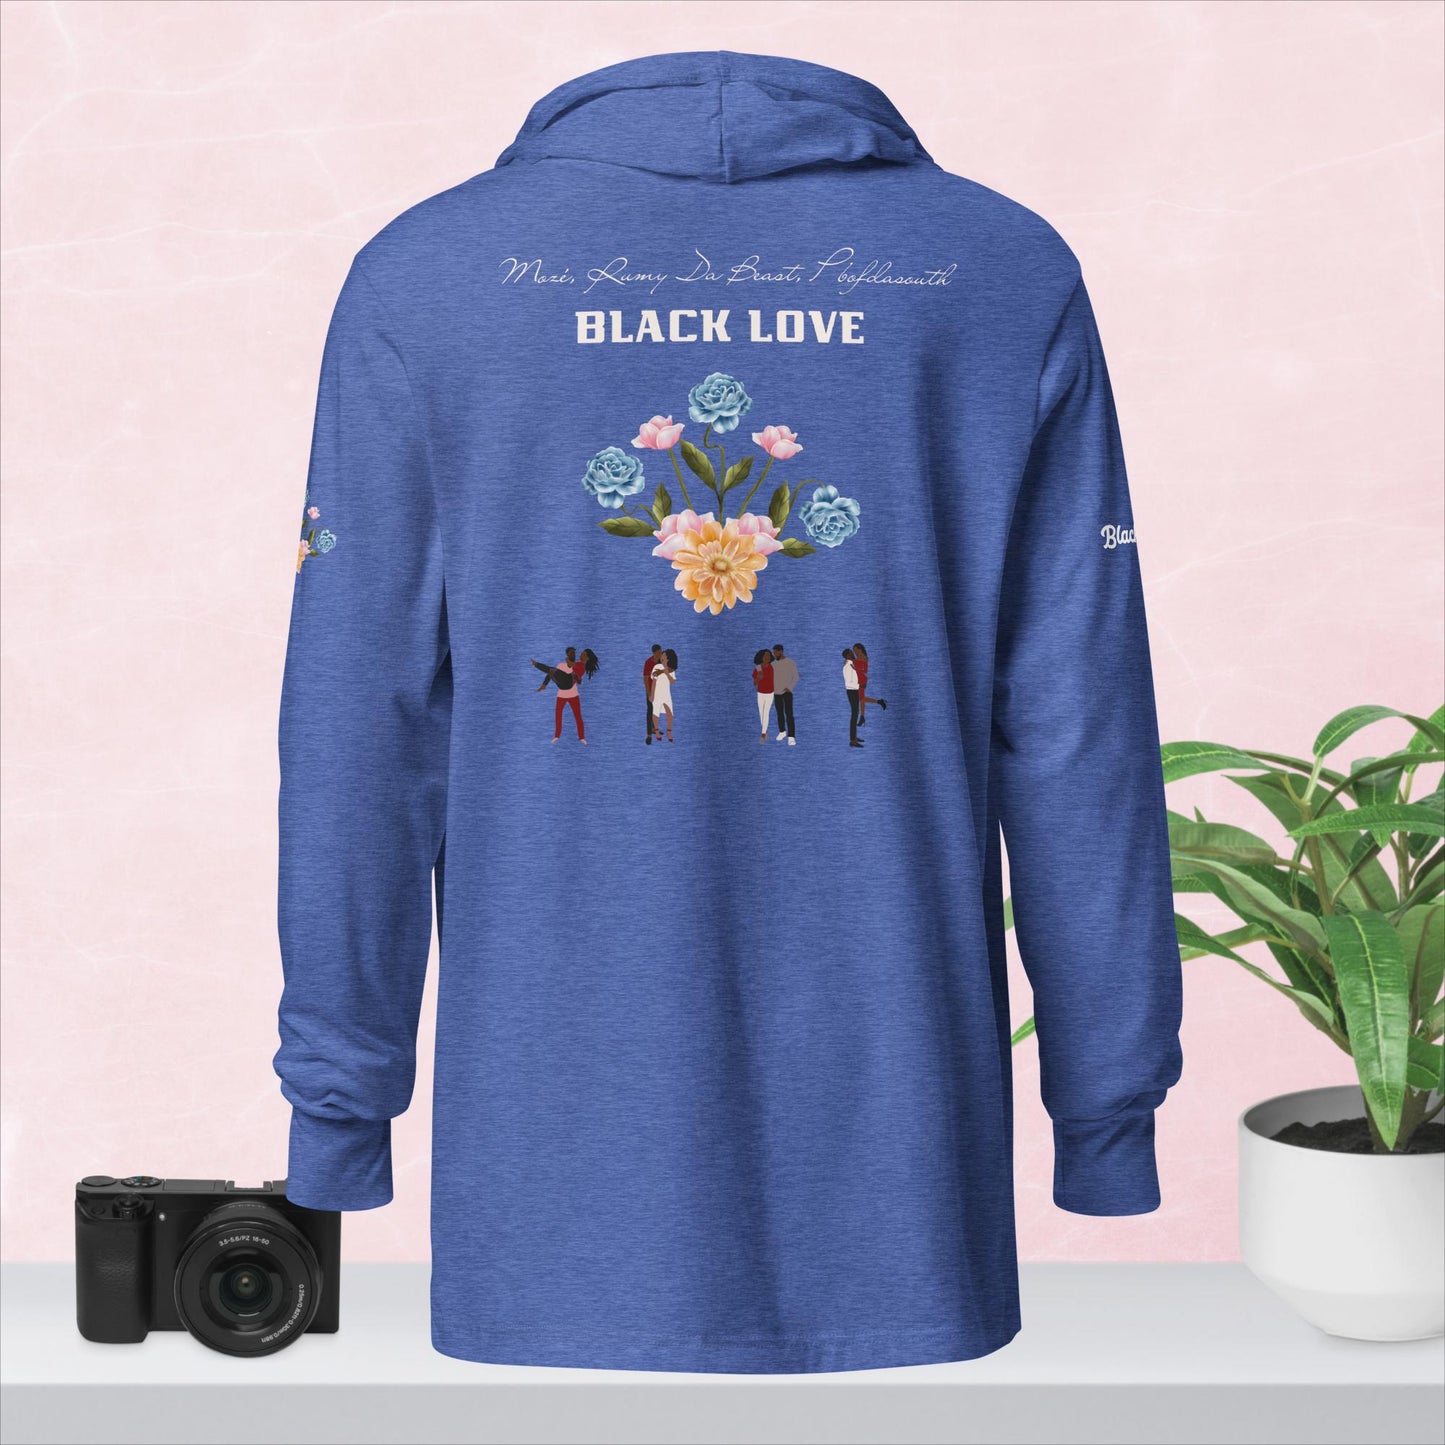 "Black Love" Limited Edition Hooded long-sleeve